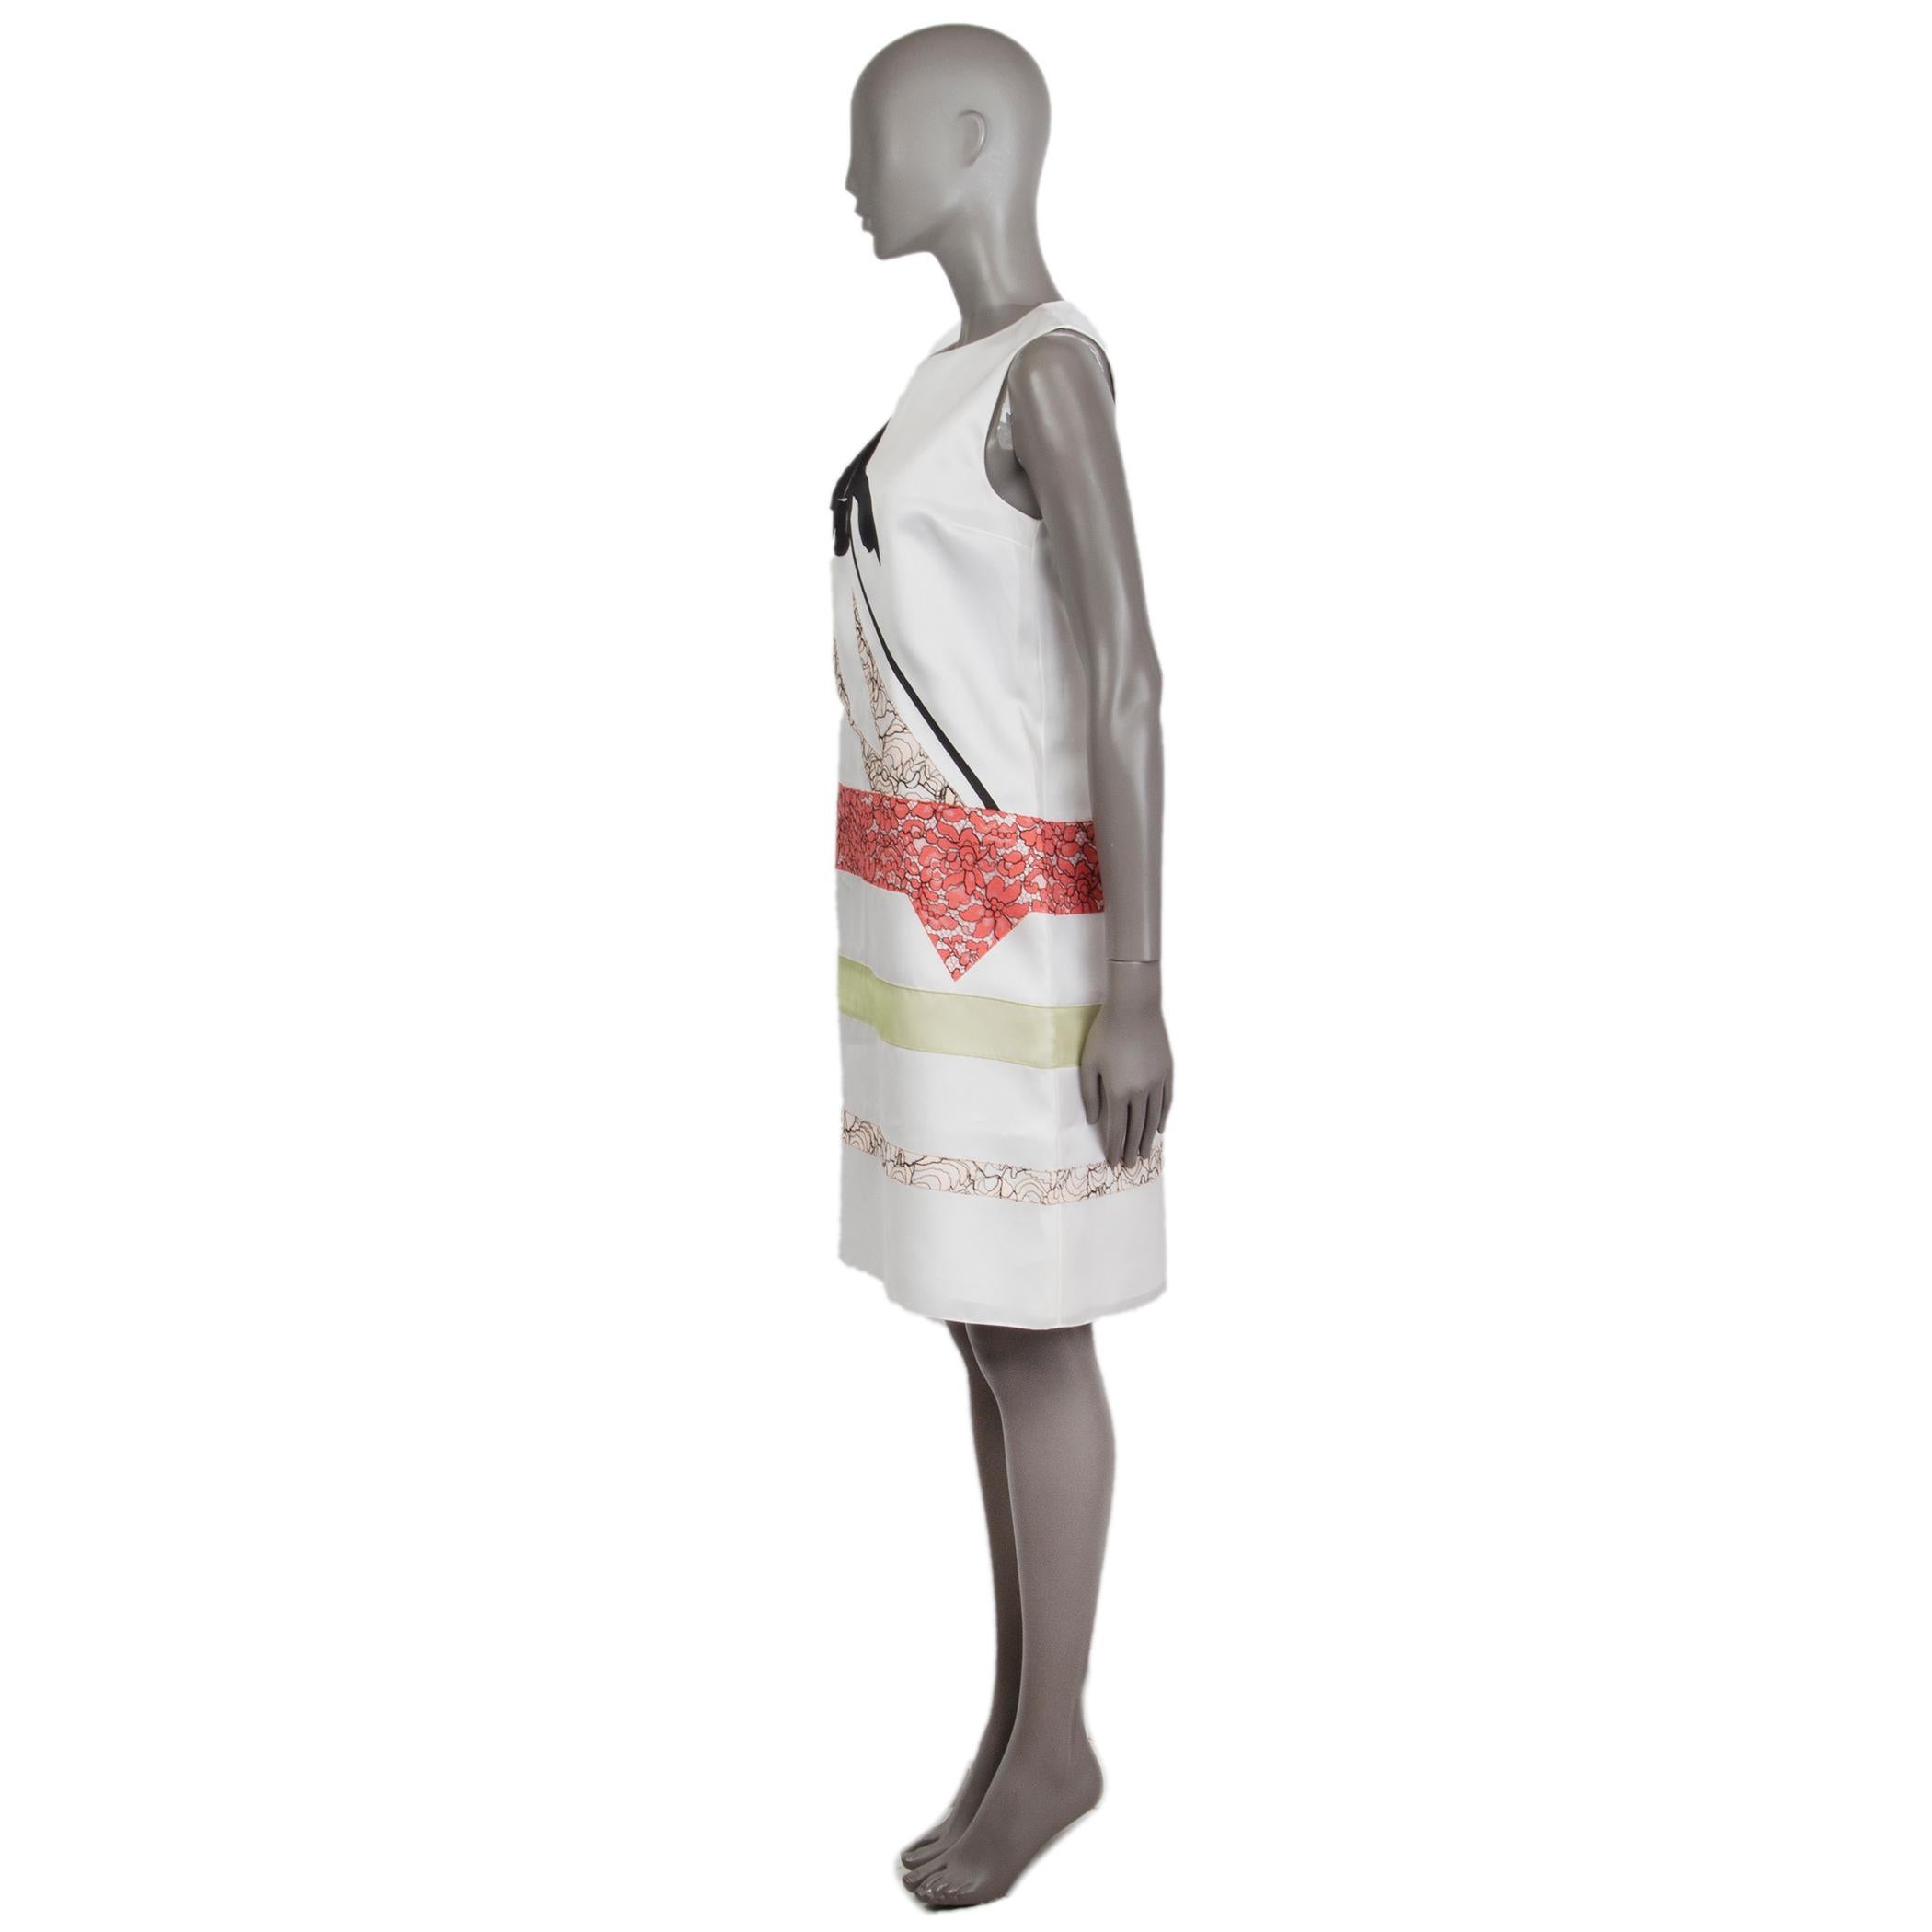 Christian Dior lace-panelled shift dress in off-white, black, coral, rose, and sage silk (100%). Closes with hook and invisible zipper on the back. Lined in off-white silk (100%). Has been worn and is in excellent condition. 

Tag Size 38
Size